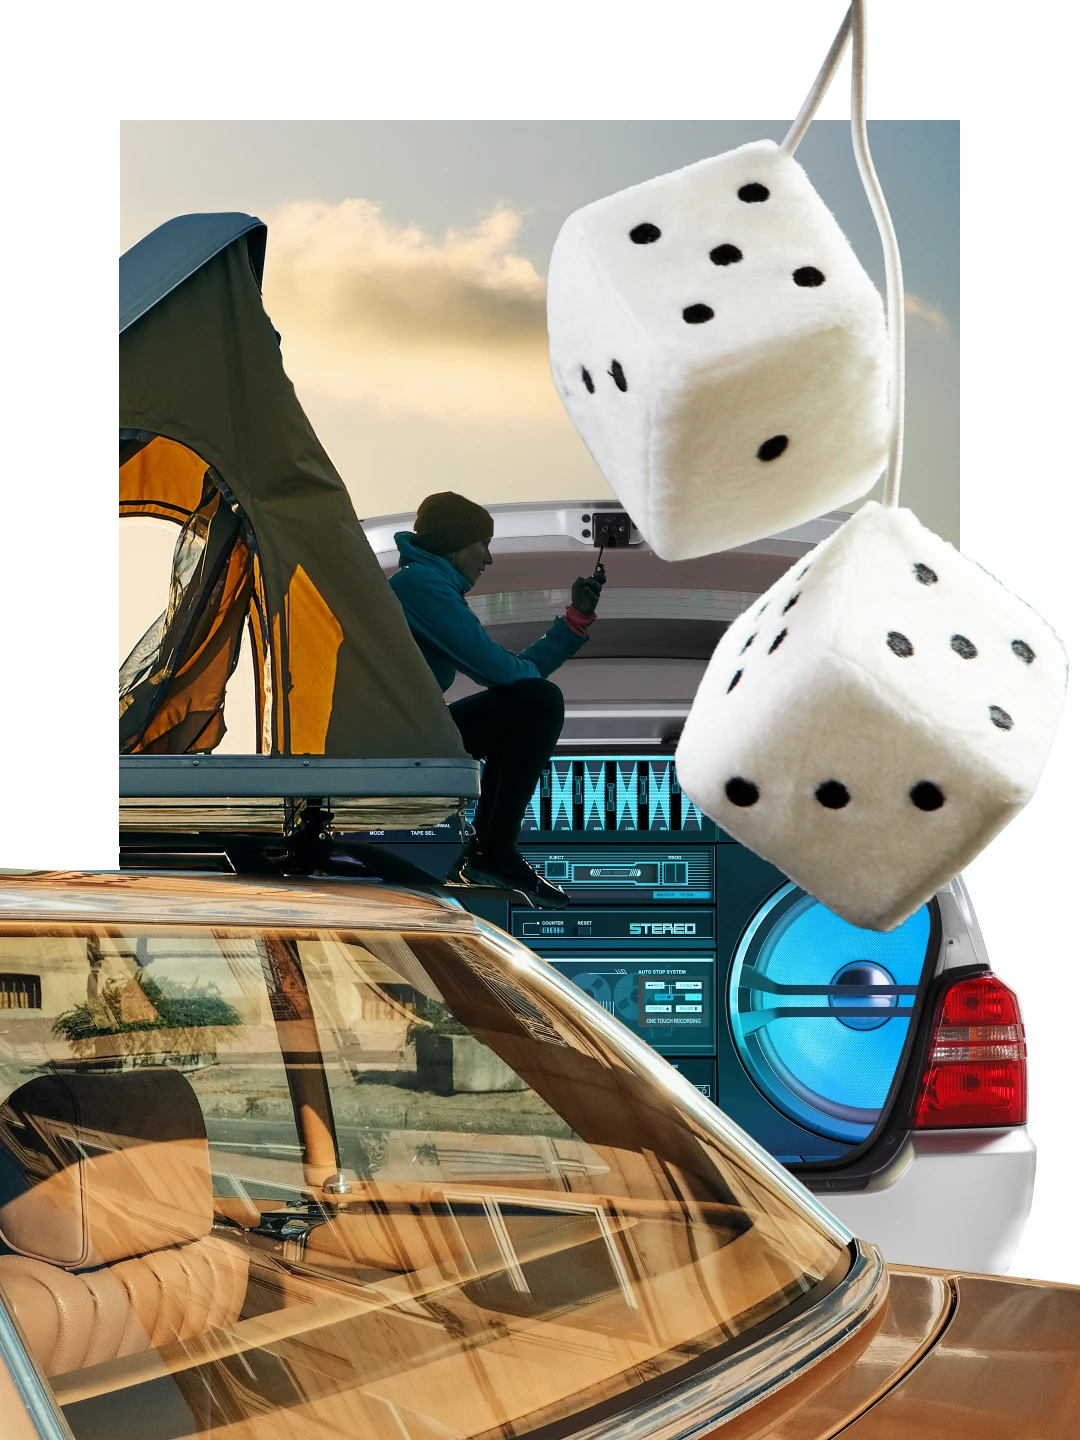 Collage of car-themed items. A boom box in the background in front of a blue sky with white clouds. A person on a cellphone near a tent on the upper left. Large fuzzy dice on the right. View inside the back of a brown car through the windshield at lower left.
